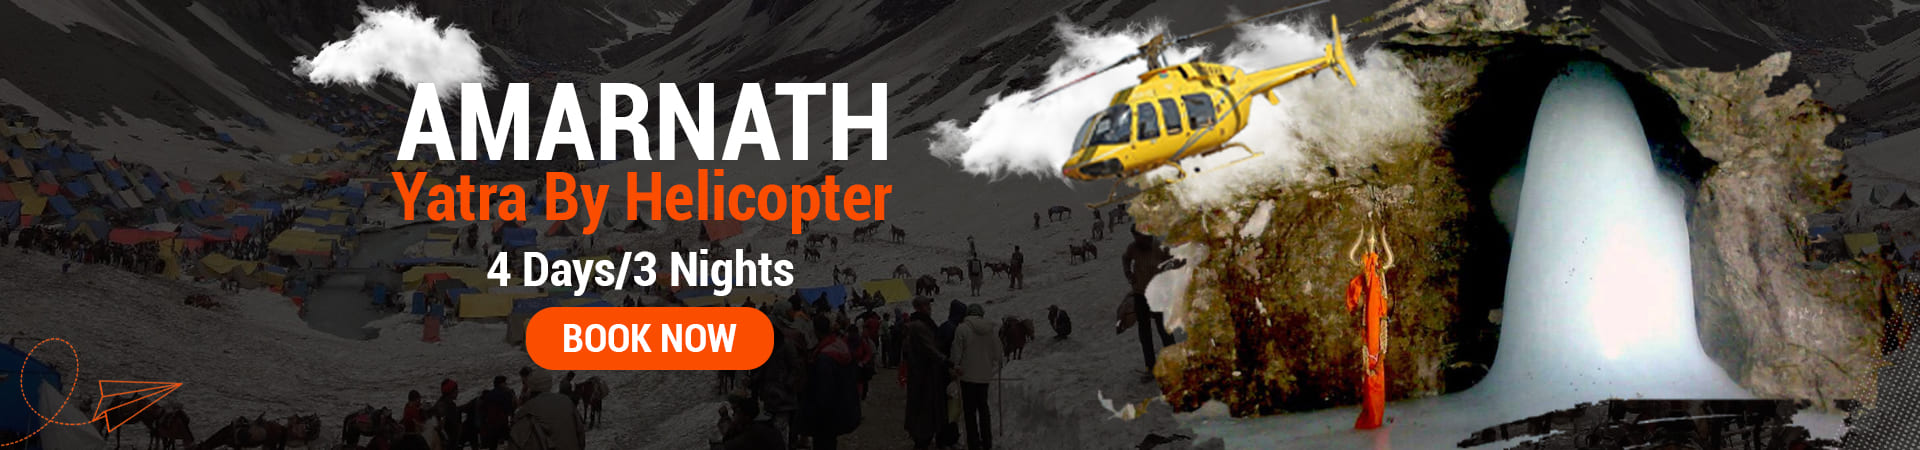 Amarnath yatra by helicopter tour